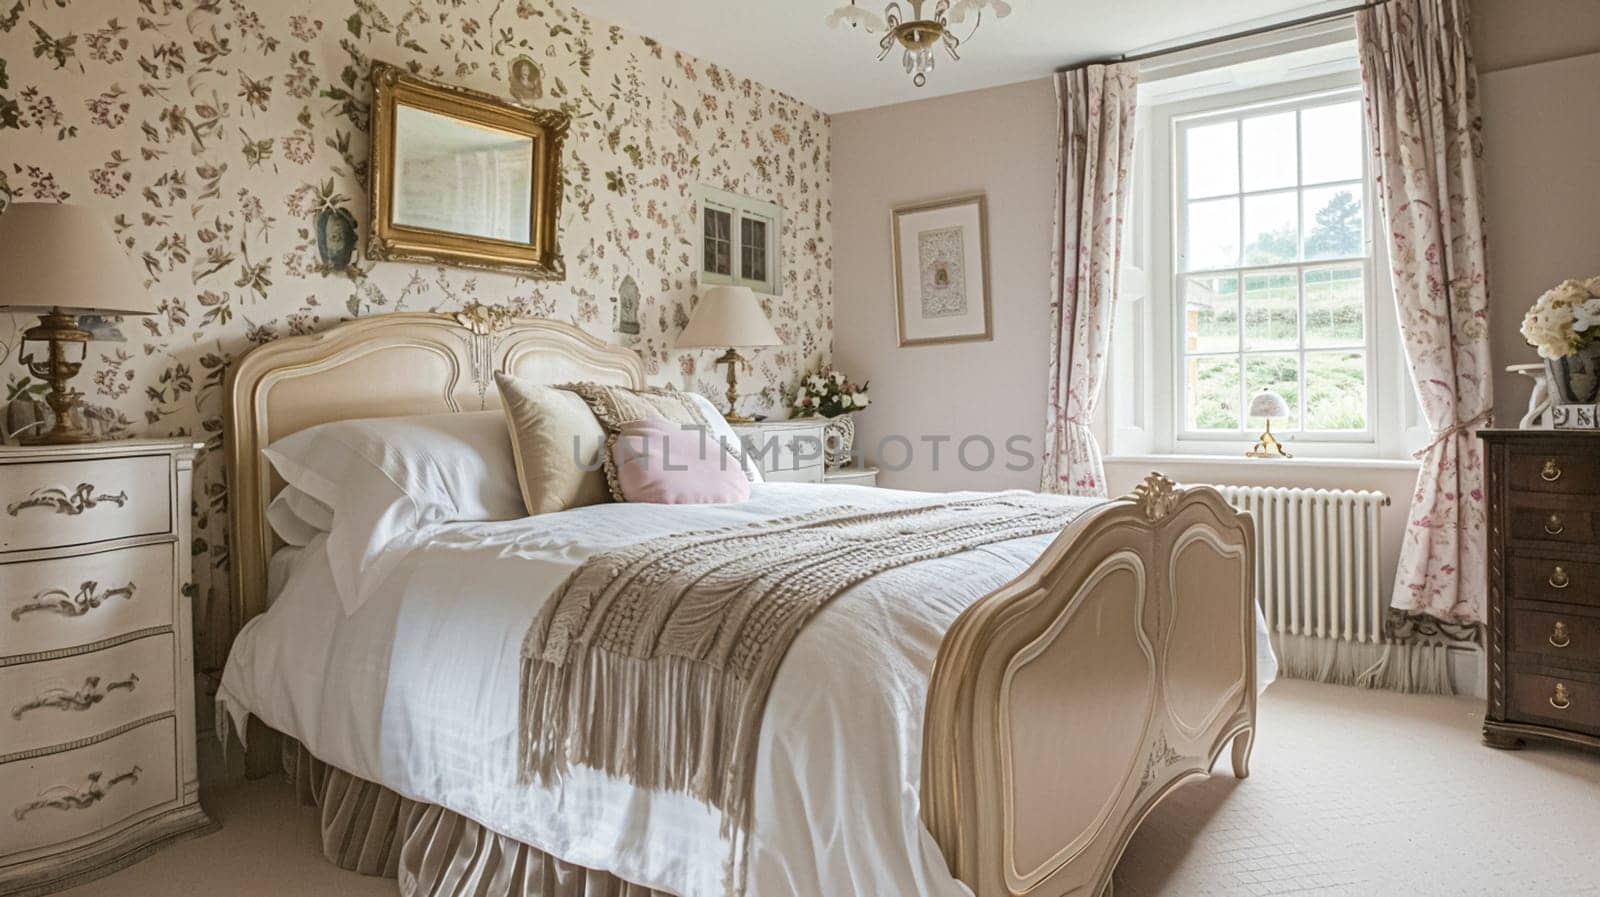 Bedroom decor in Edwardian manor house, interior design and home decor, bed with elegant bedding and bespoke furniture, English country house, holiday rental and cottage style inspiration